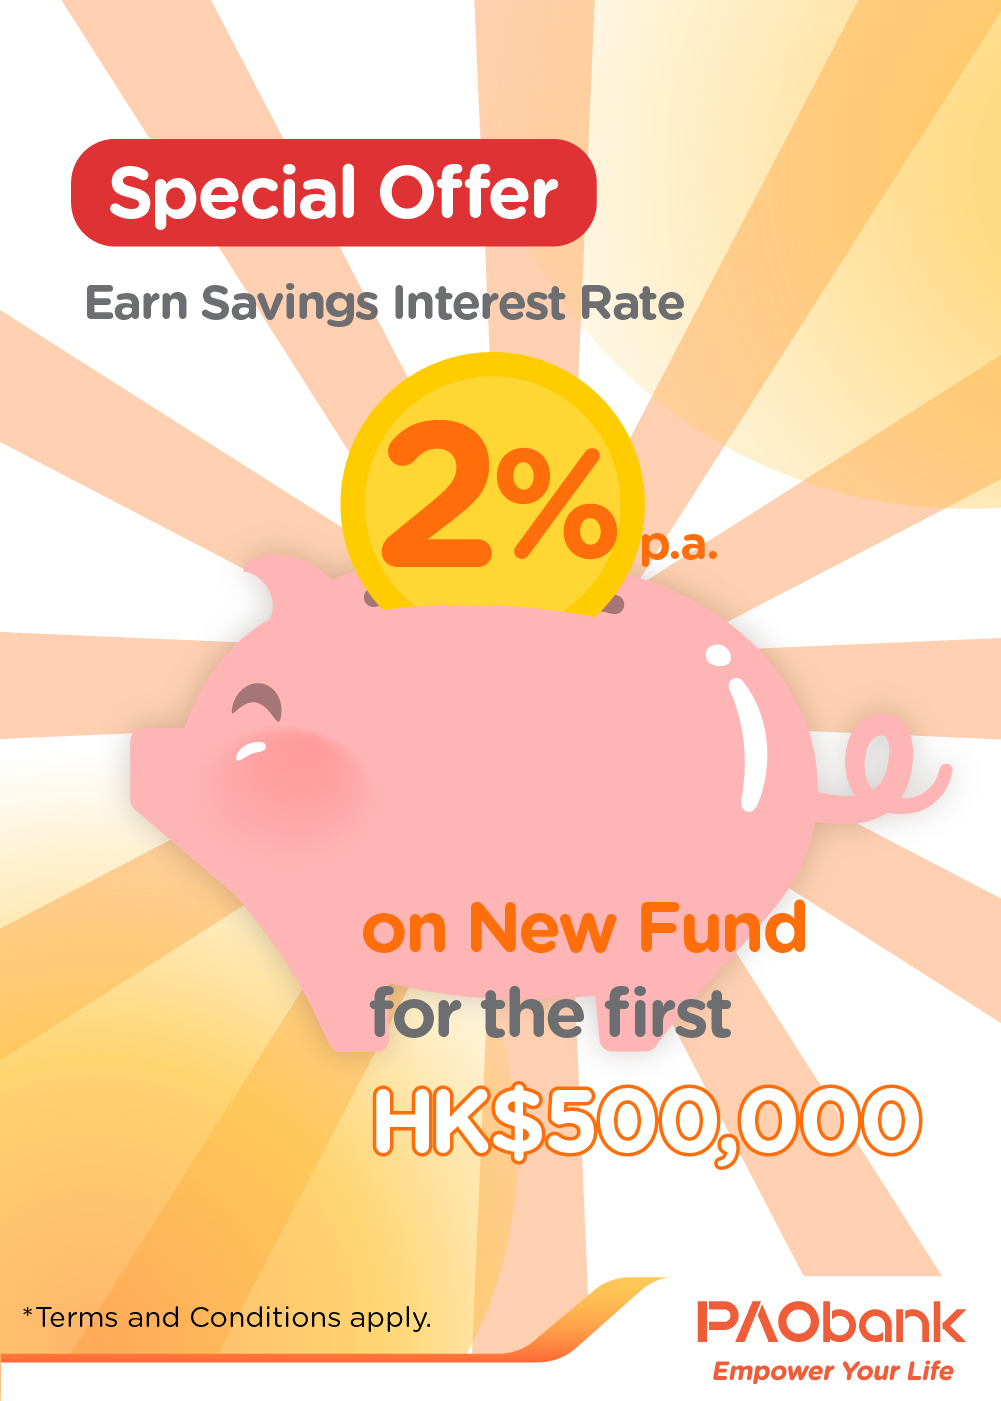 PAOB SME Services - 2% p.a. Savings Interest rate for new fund